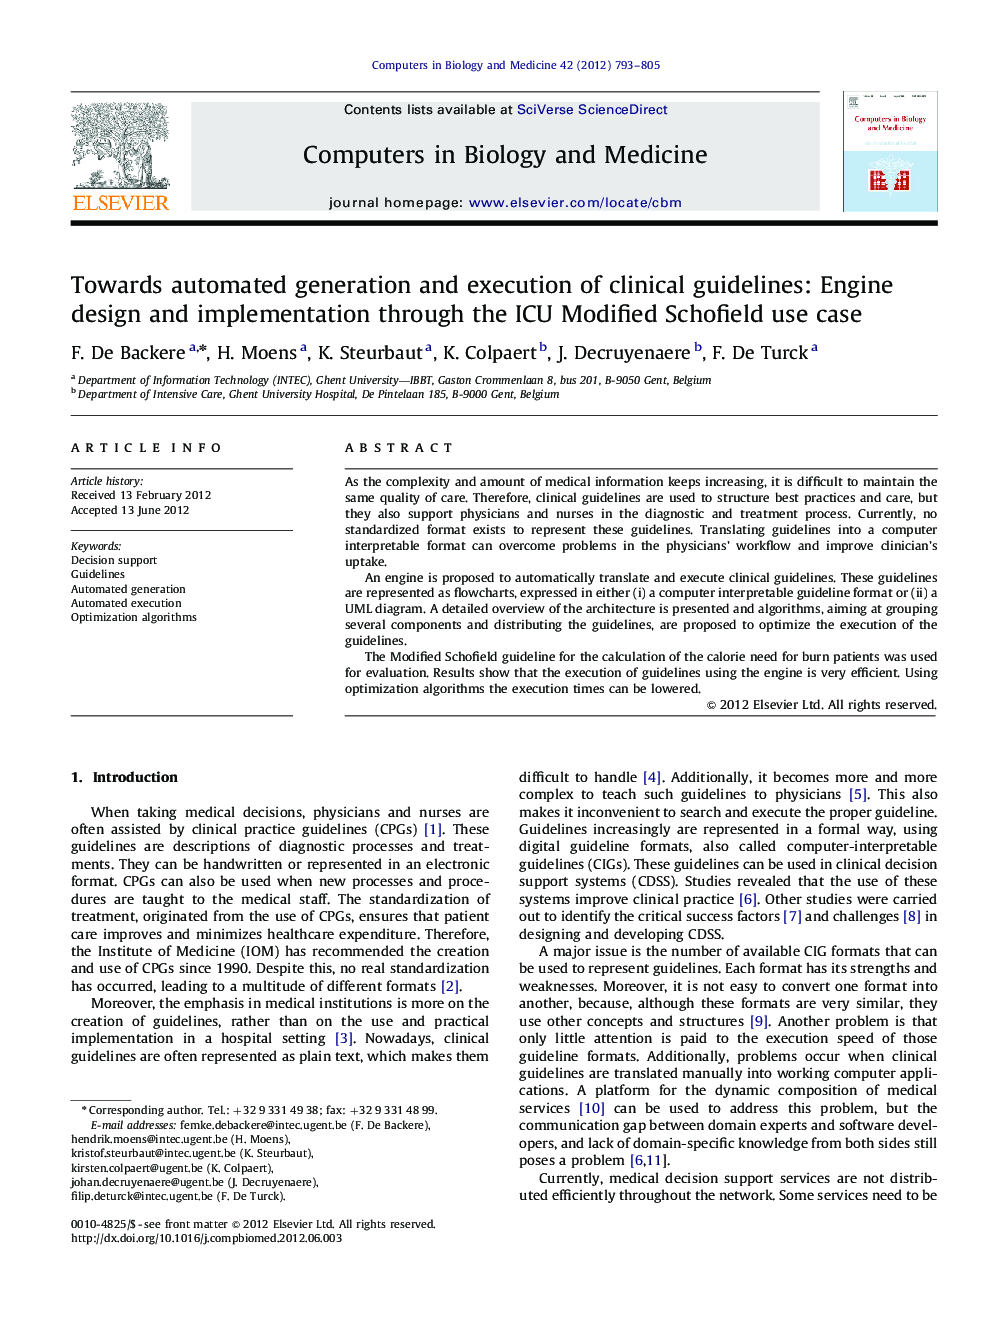 Towards automated generation and execution of clinical guidelines: Engine design and implementation through the ICU Modified Schofield use case